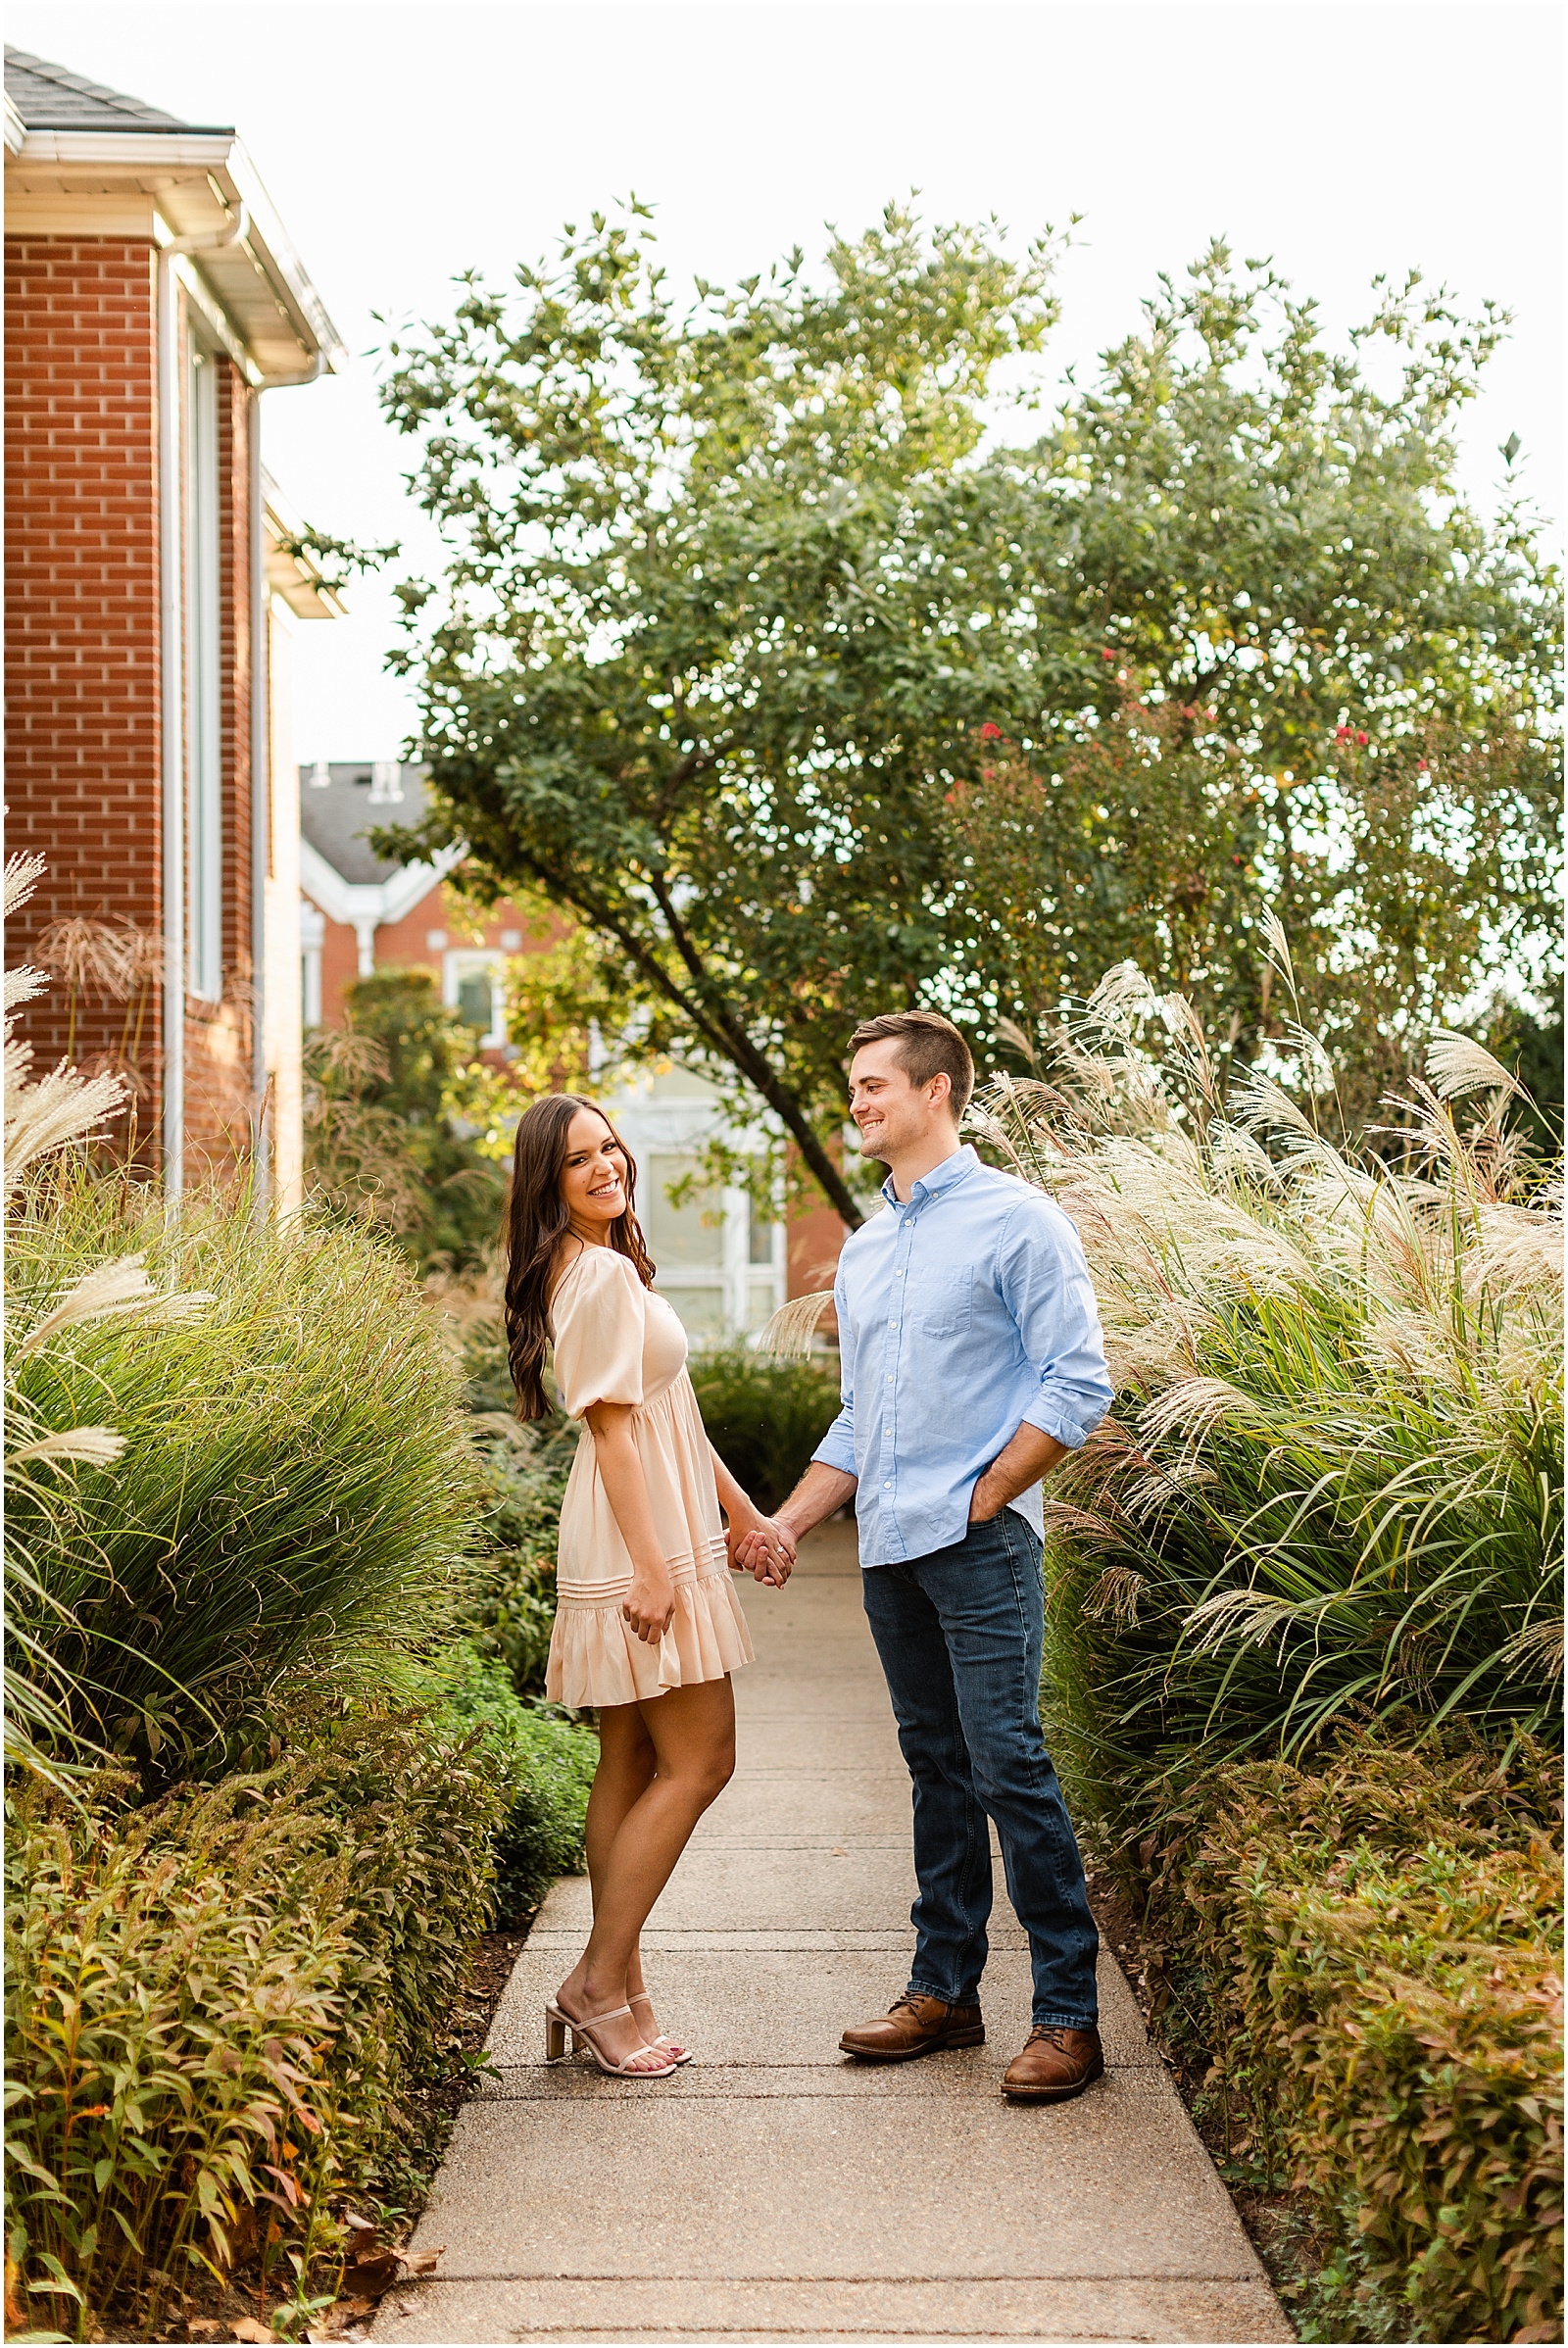 Emma and Jace's Downtown Newburgh Engagement Session | Bret and Brandie Photography | Evansville Indiana Wedding Photographers_0024.jpg